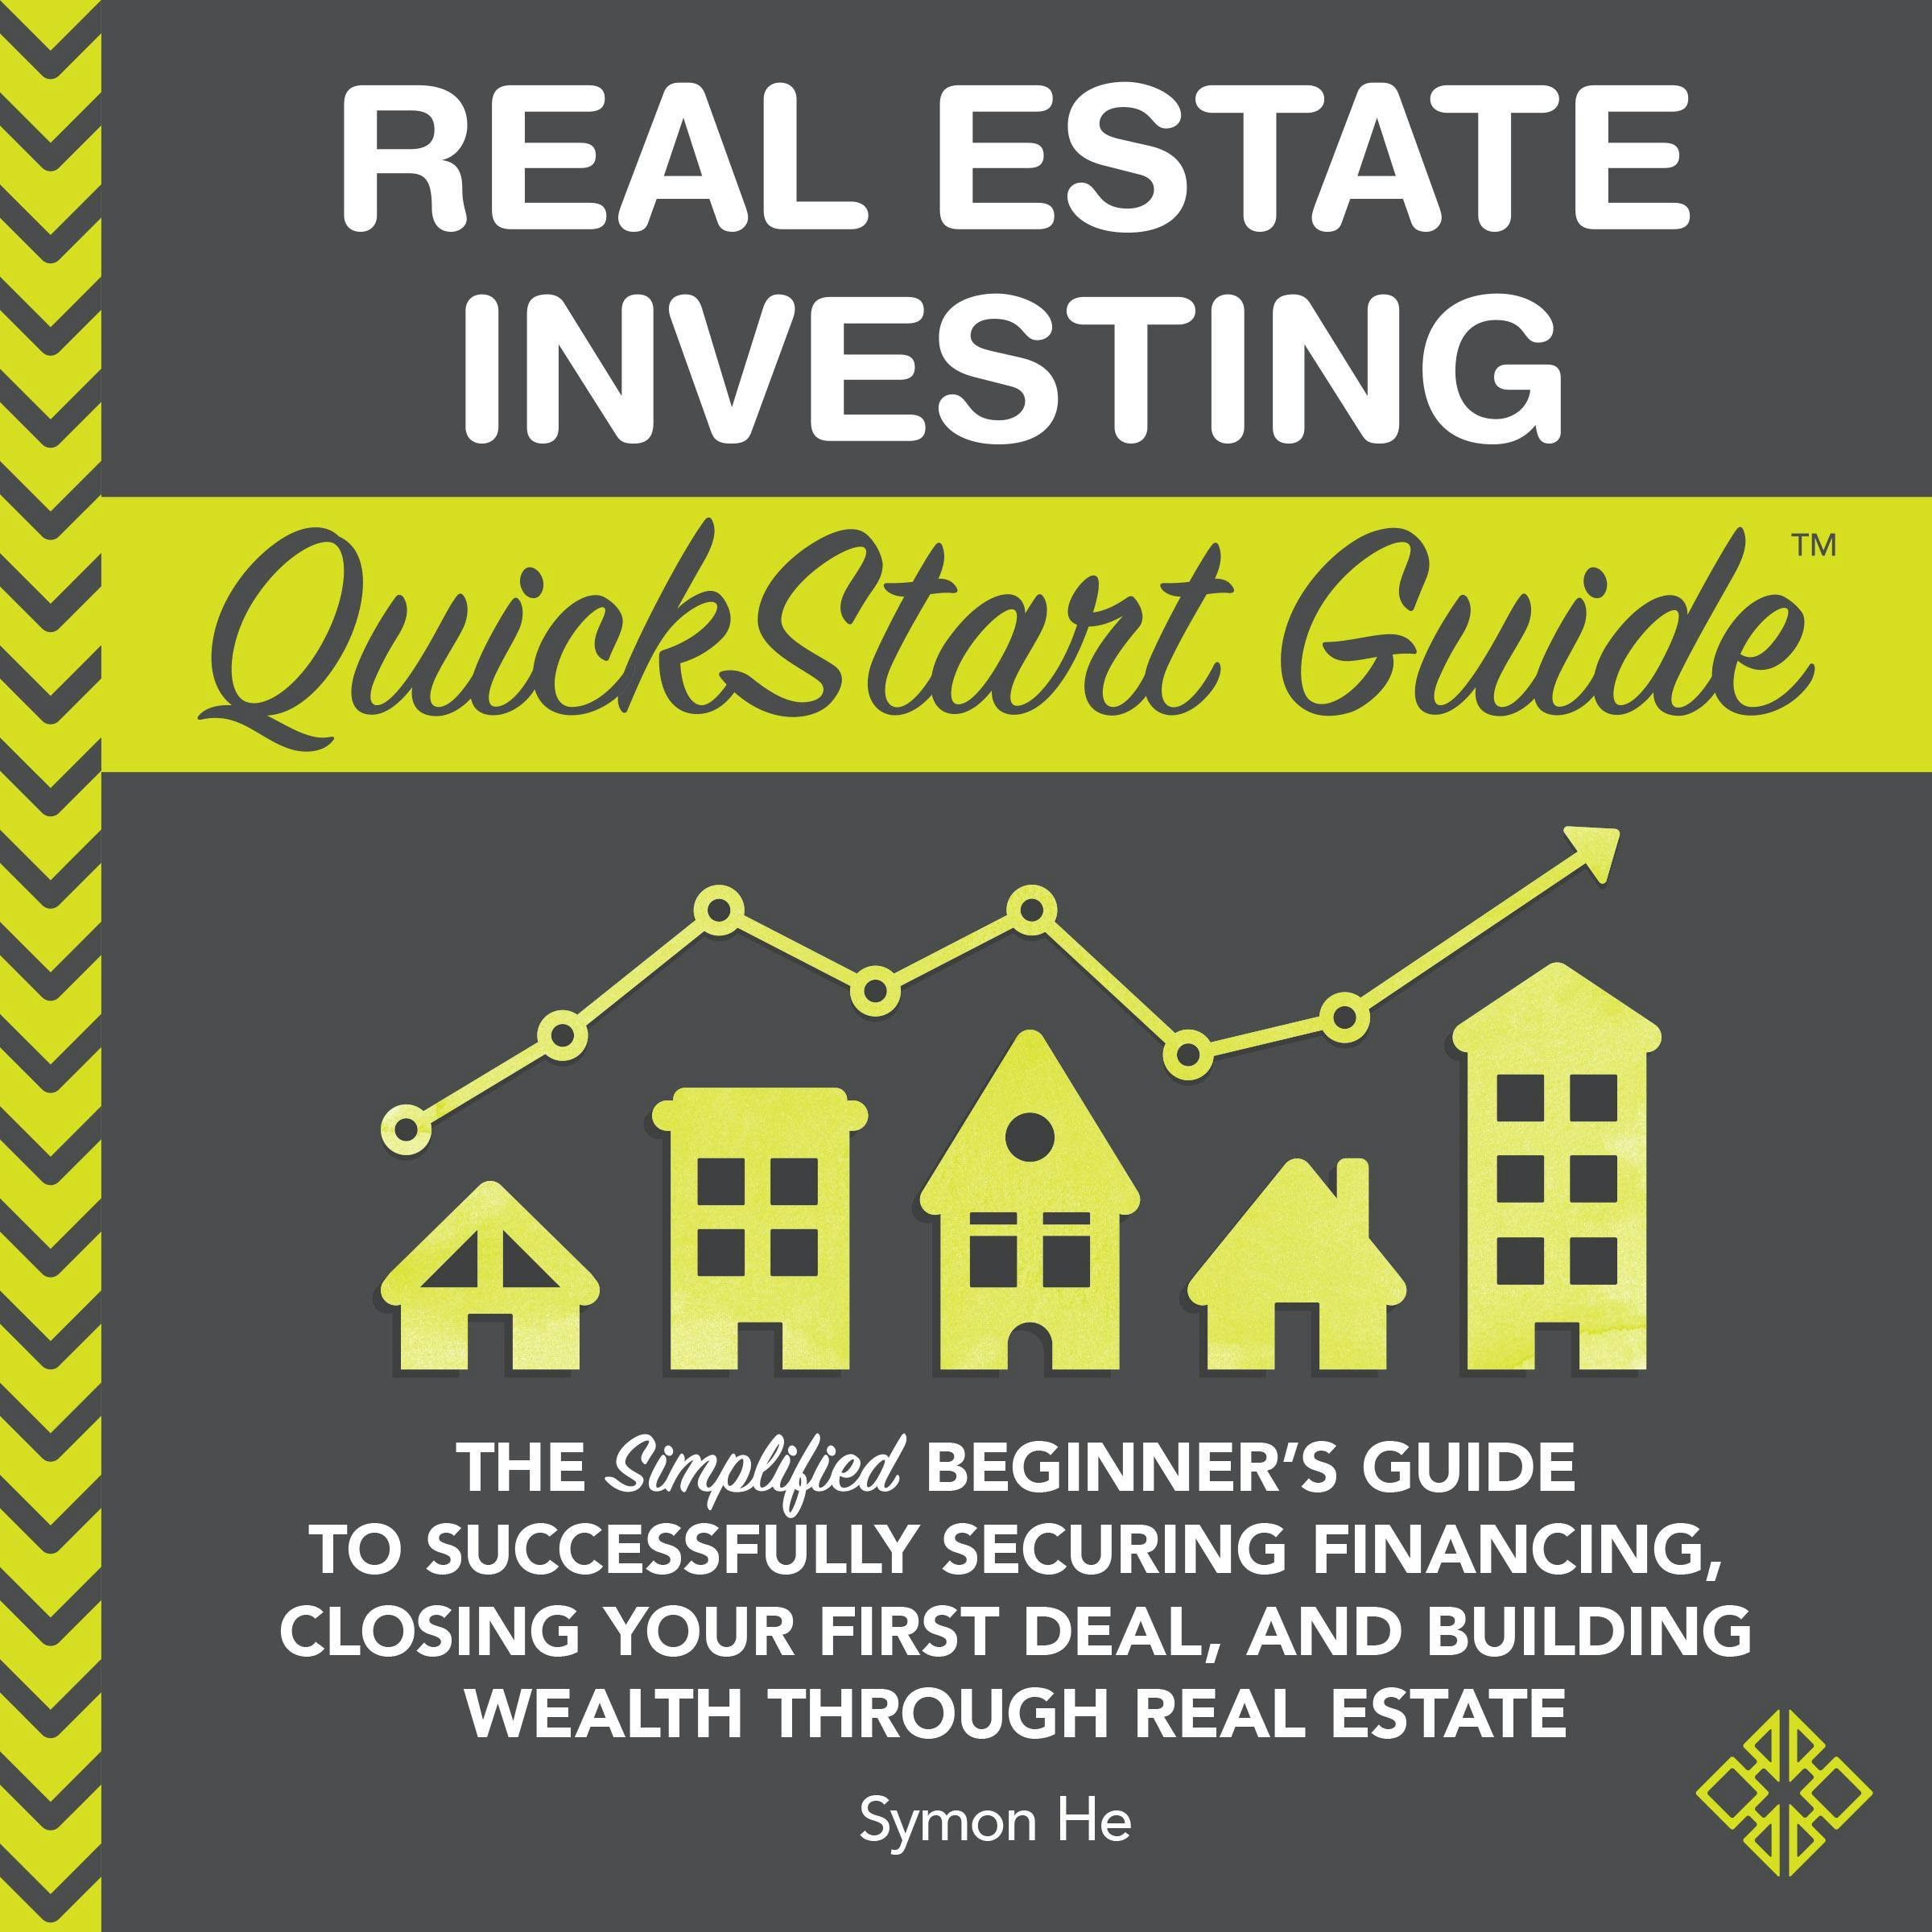 Real Estate Investing QuickStart Guide: The Simplified Beginner’s Guide to Successfully Securing Financing, Closing Your First Deal, and Building Wealth Through Real Estate - undefined